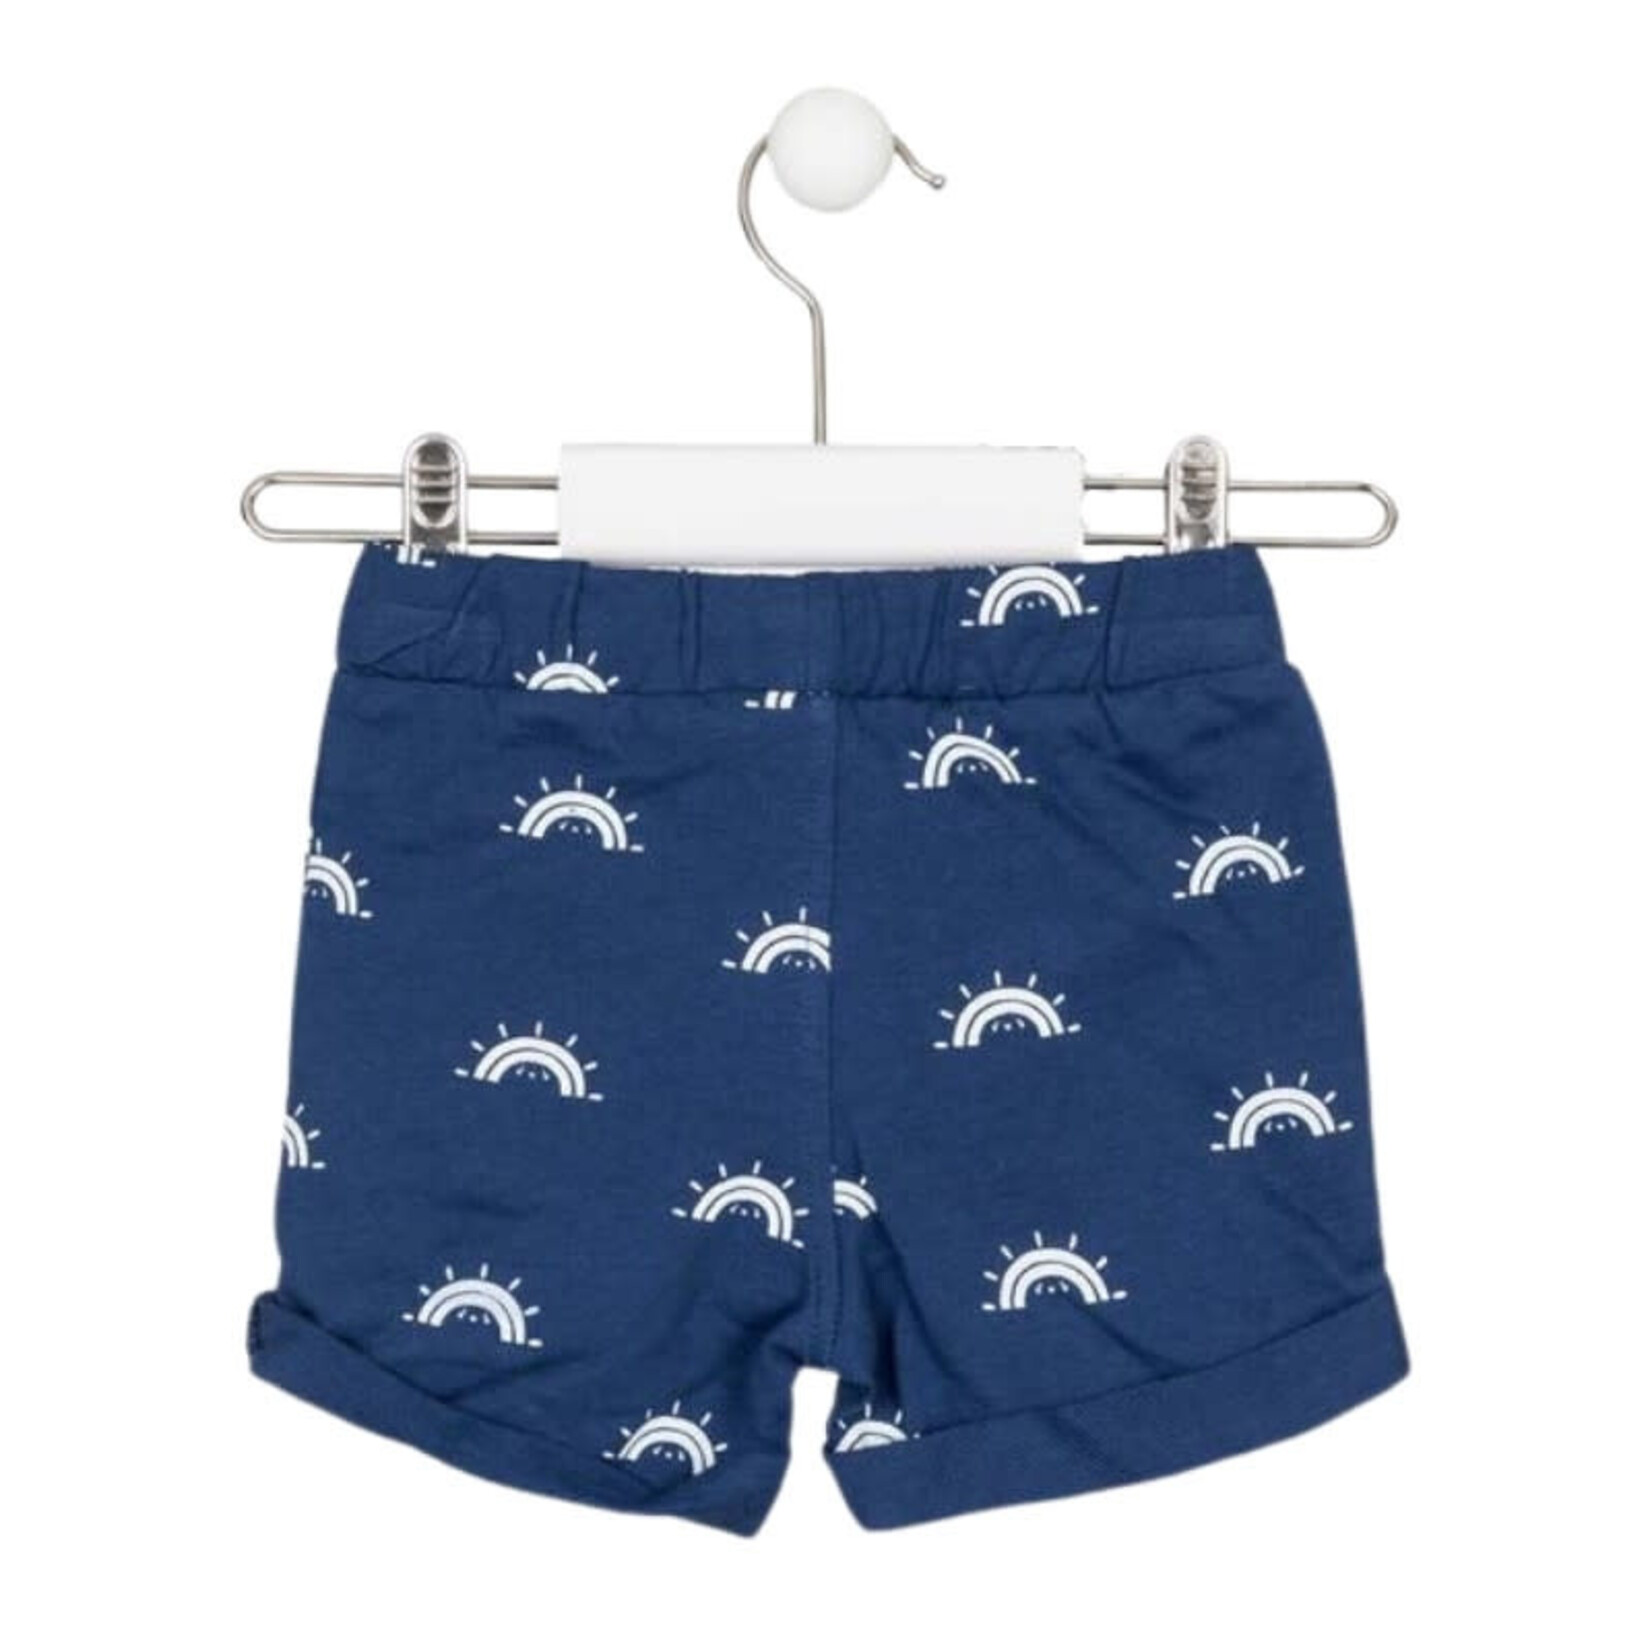 Losan LOSAN - Soft Navy Blue Shorts with Smiling Sun Print 'You are my sunshine'